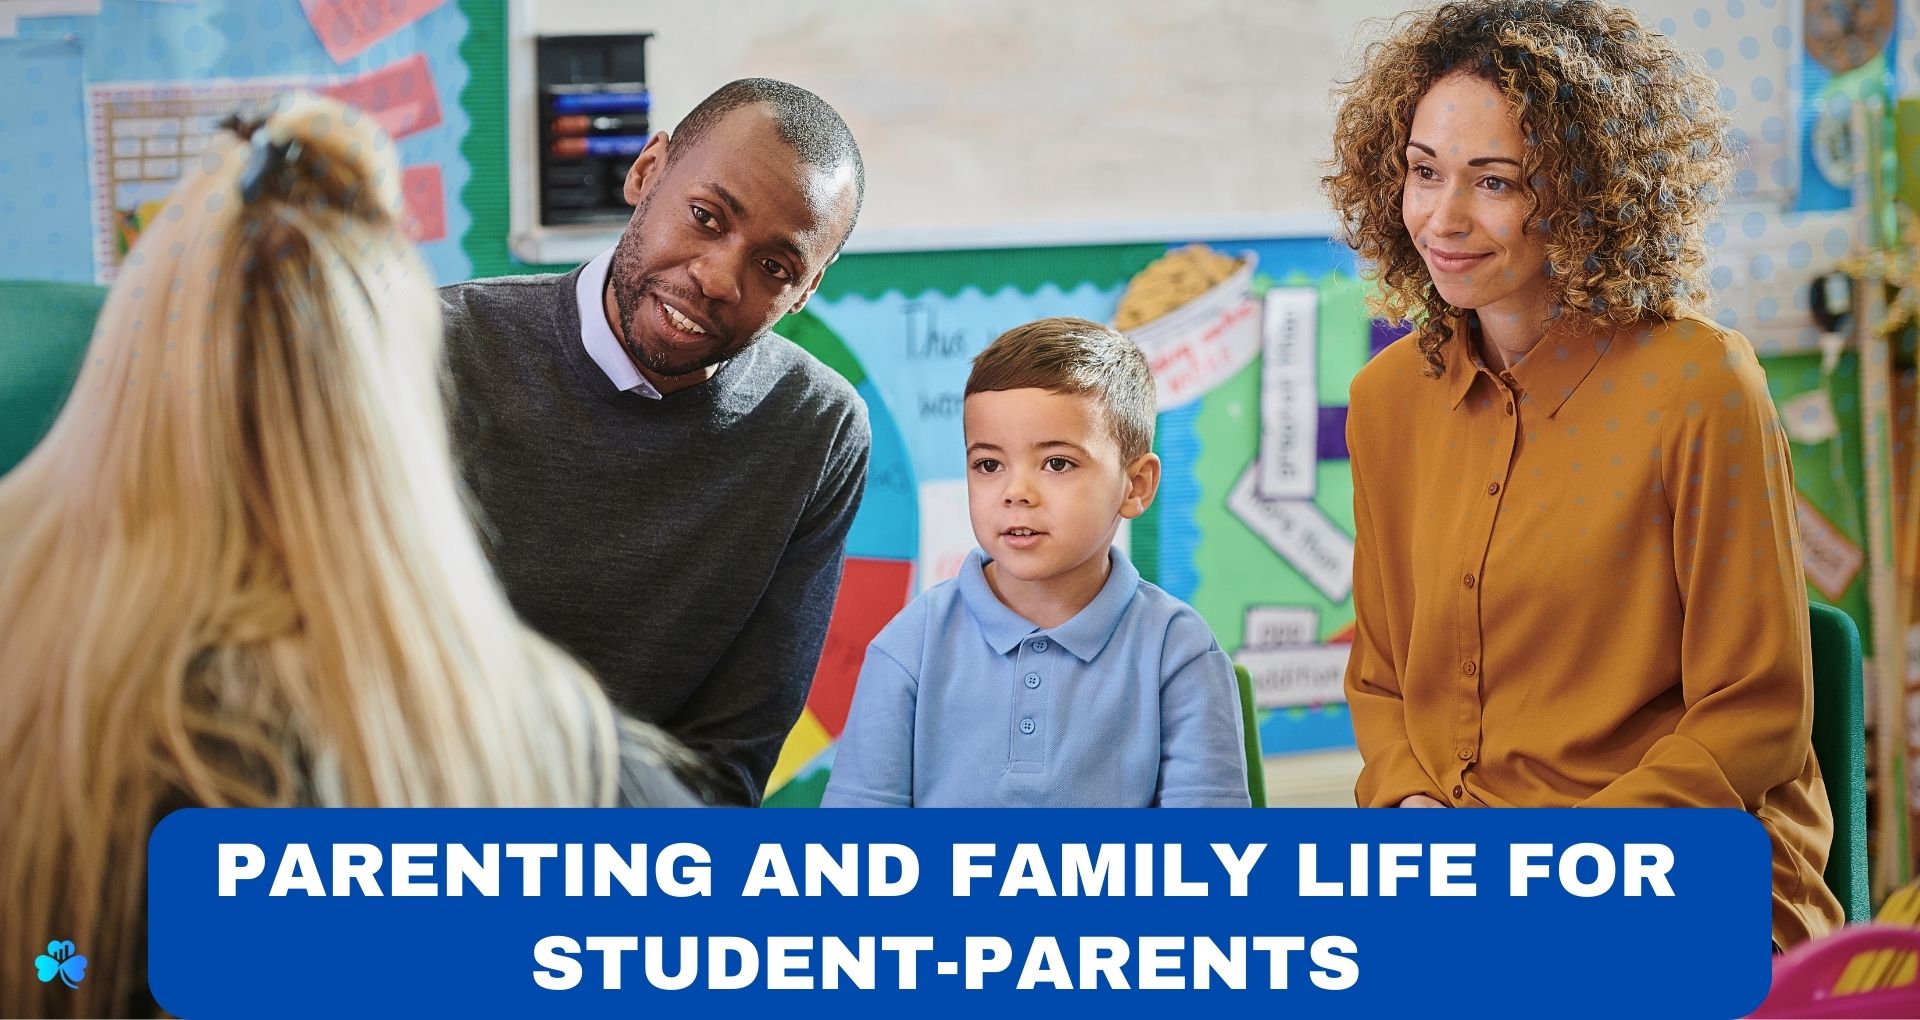 Parenting and family life for student-parents